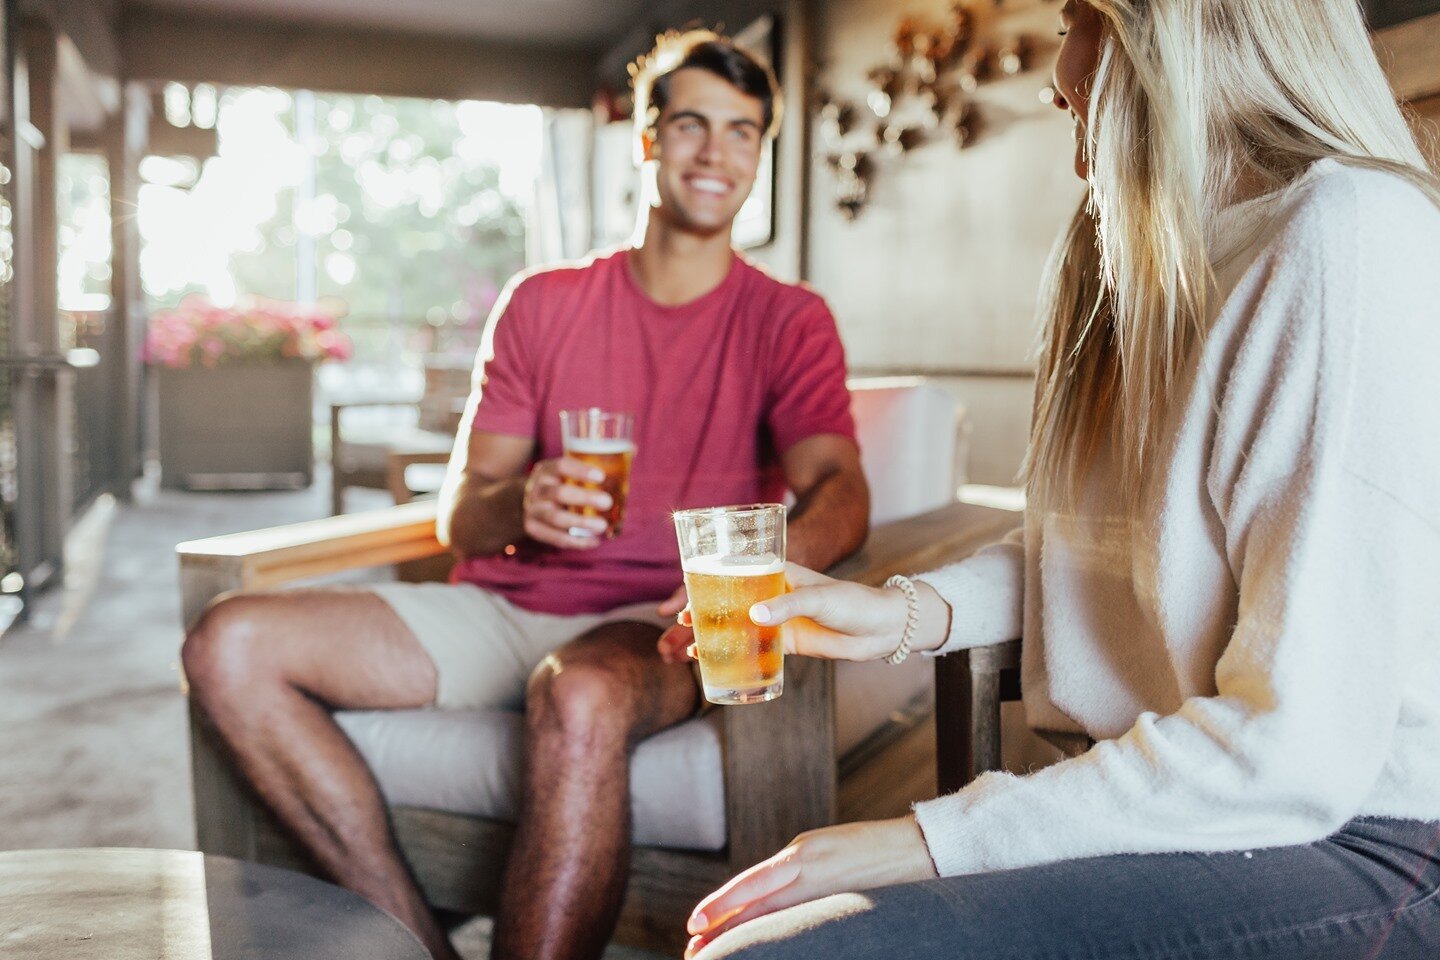 It may be cold in other states, but southern California is warm and calling your name!

Let yourself in, fill up a glass at the honor bar, and slip into vacation mode &mdash; you're on The Winston's time.

🍻 thewinstonsolvang.com